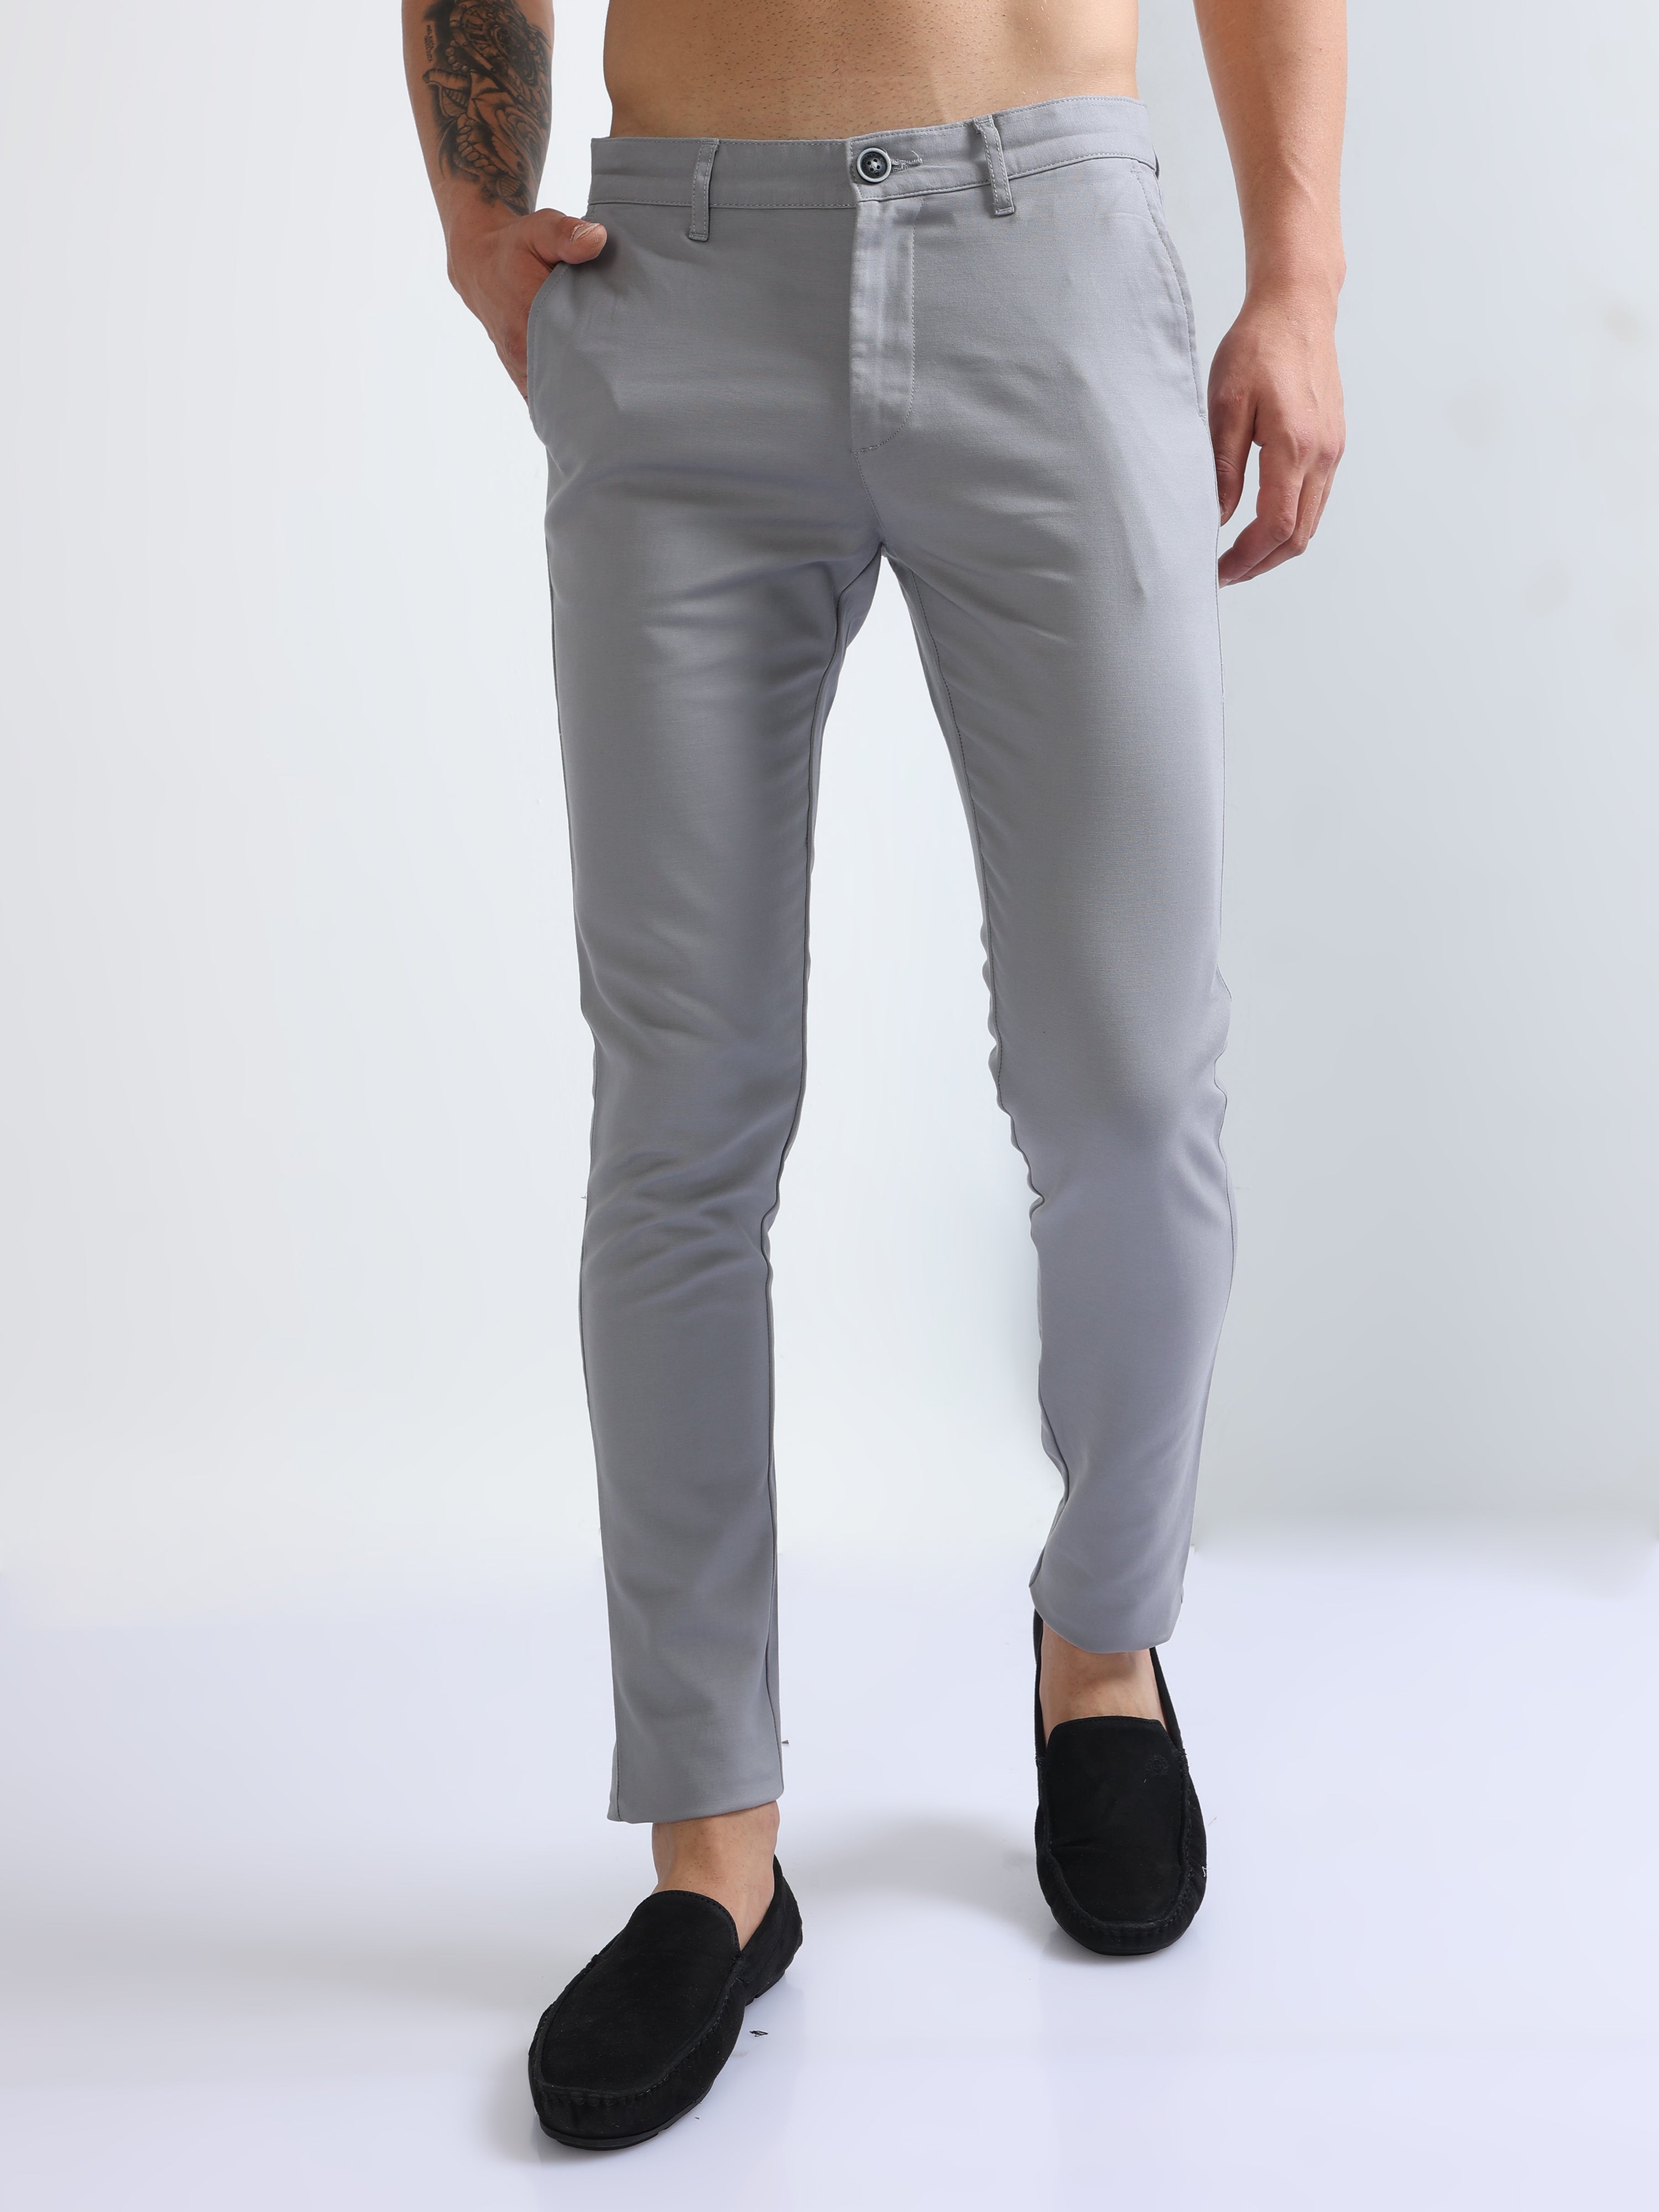 Buy Pista Green Cotton Stretch Men's Tapered Fit Trousers